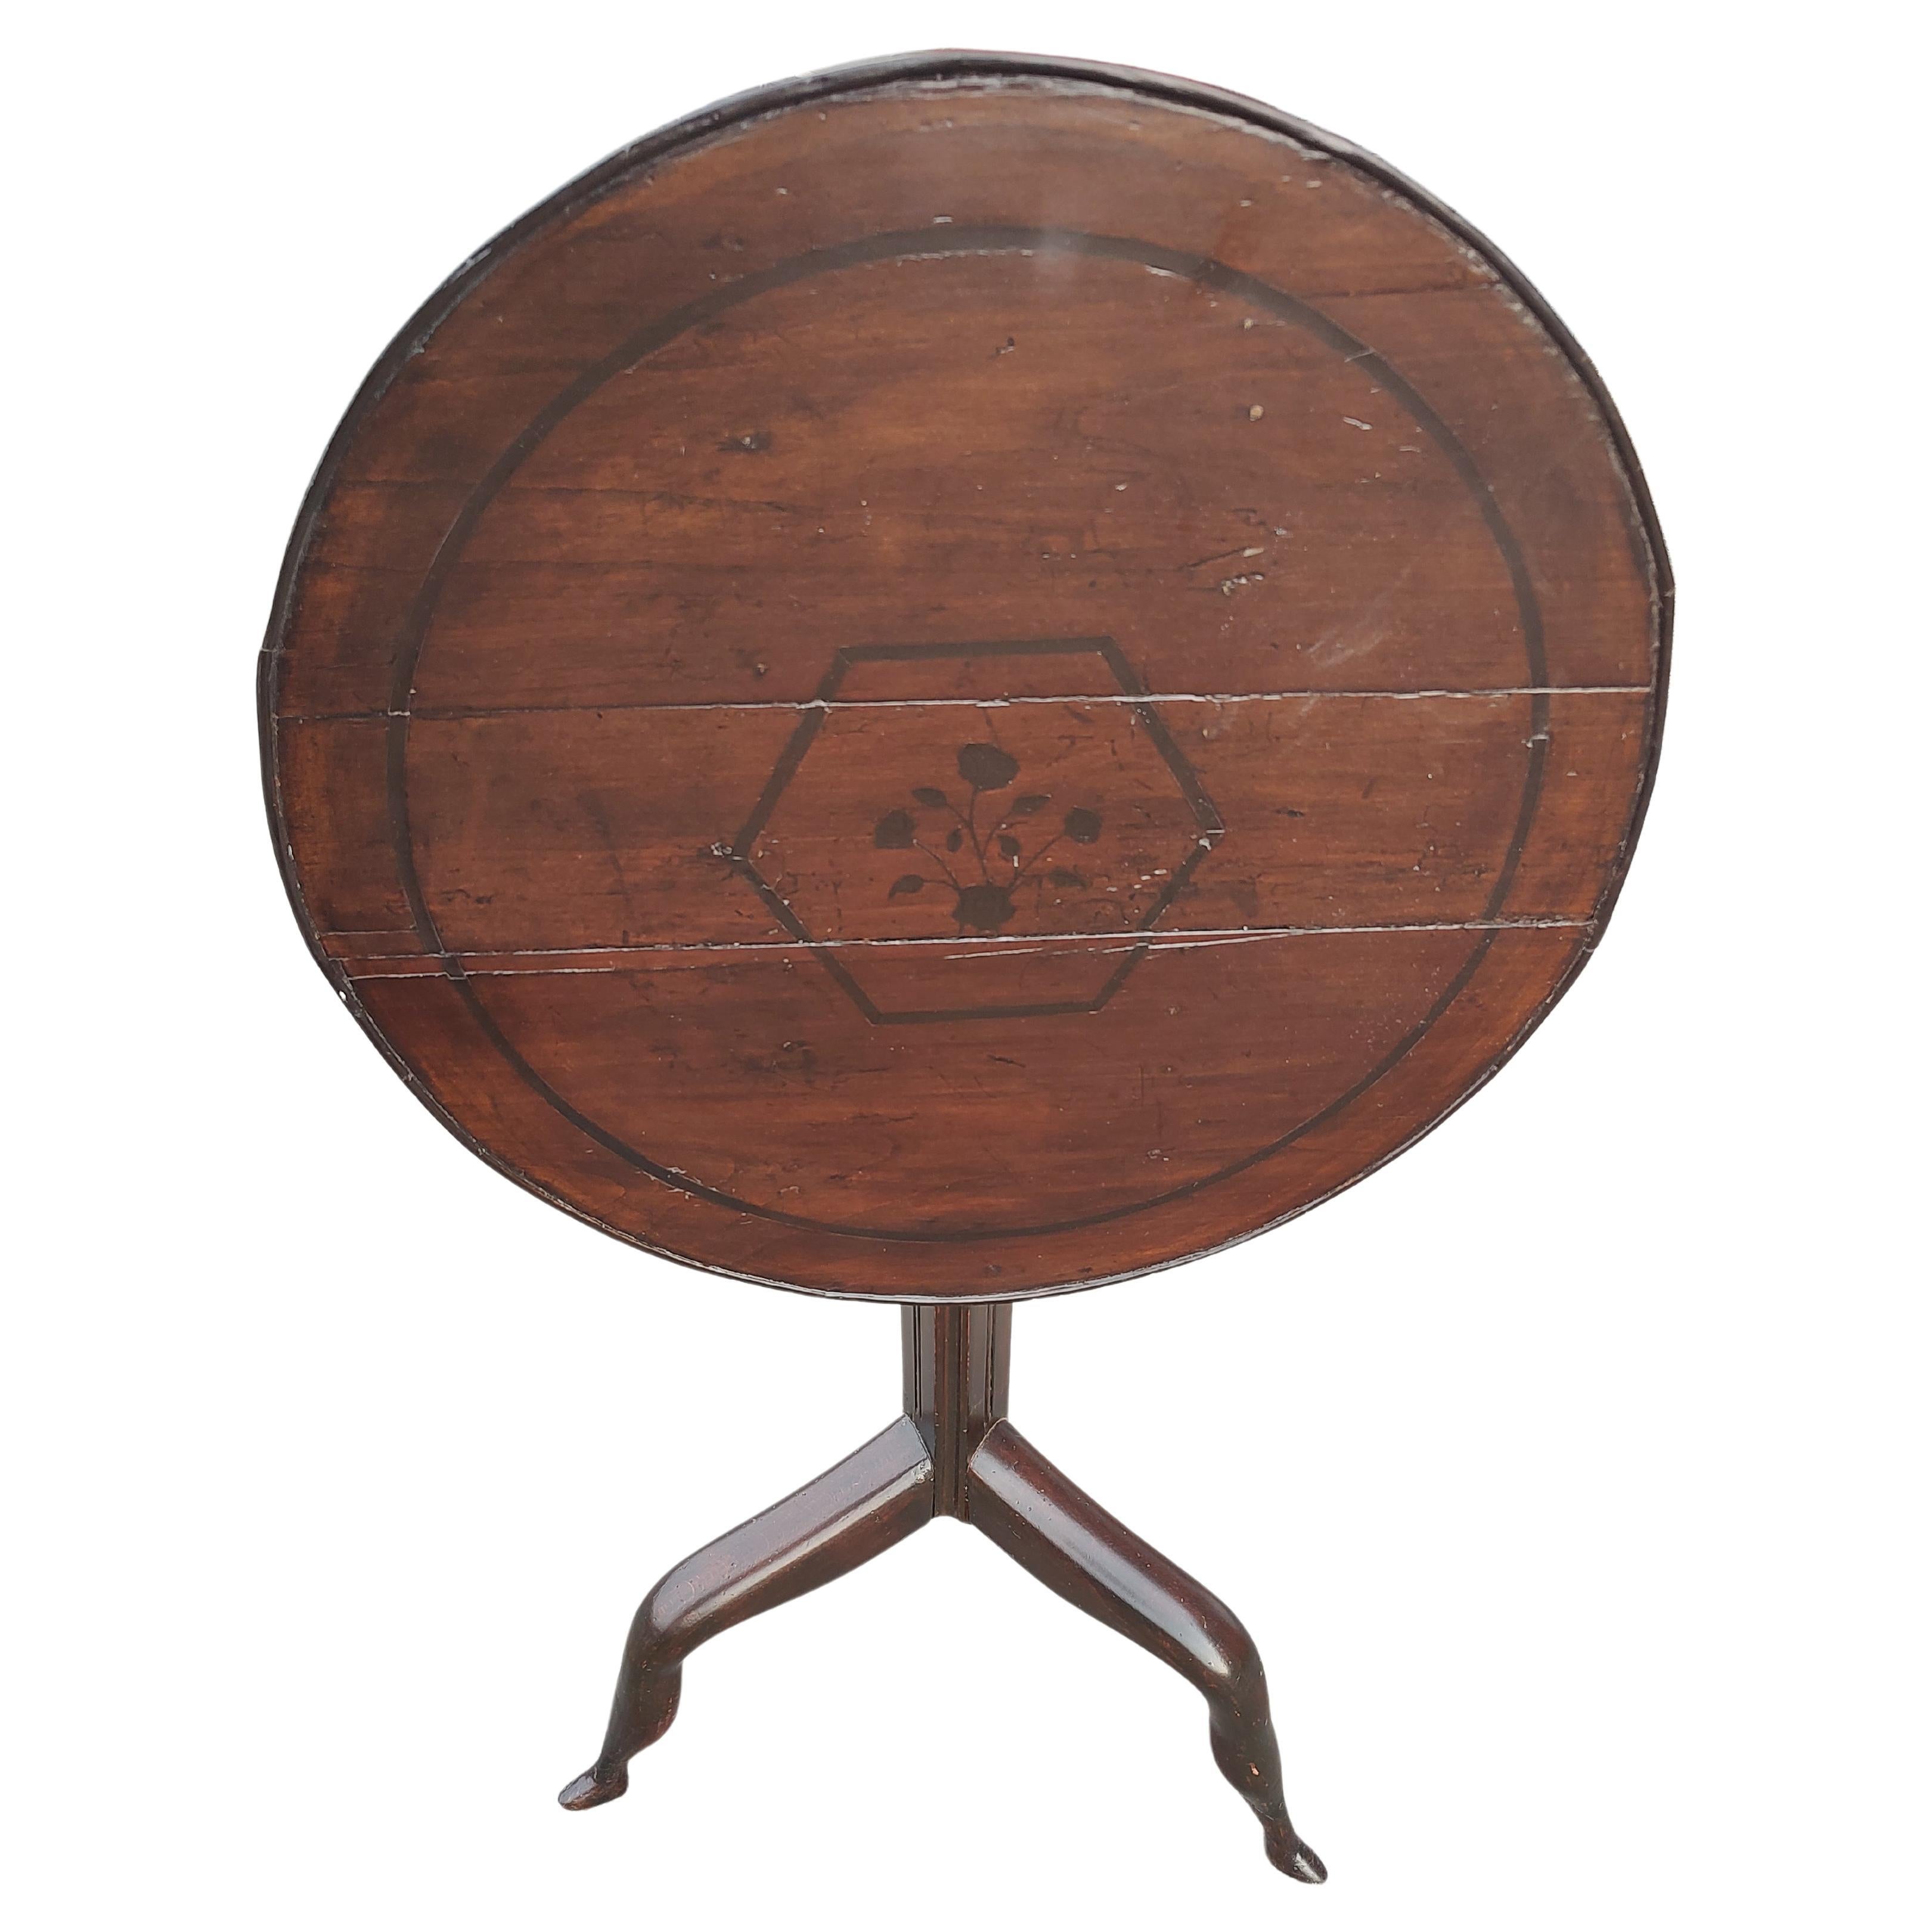 19thC Tilt Top Table with Birdcage & Shoe Feet and a Discreet Inlay Board Top